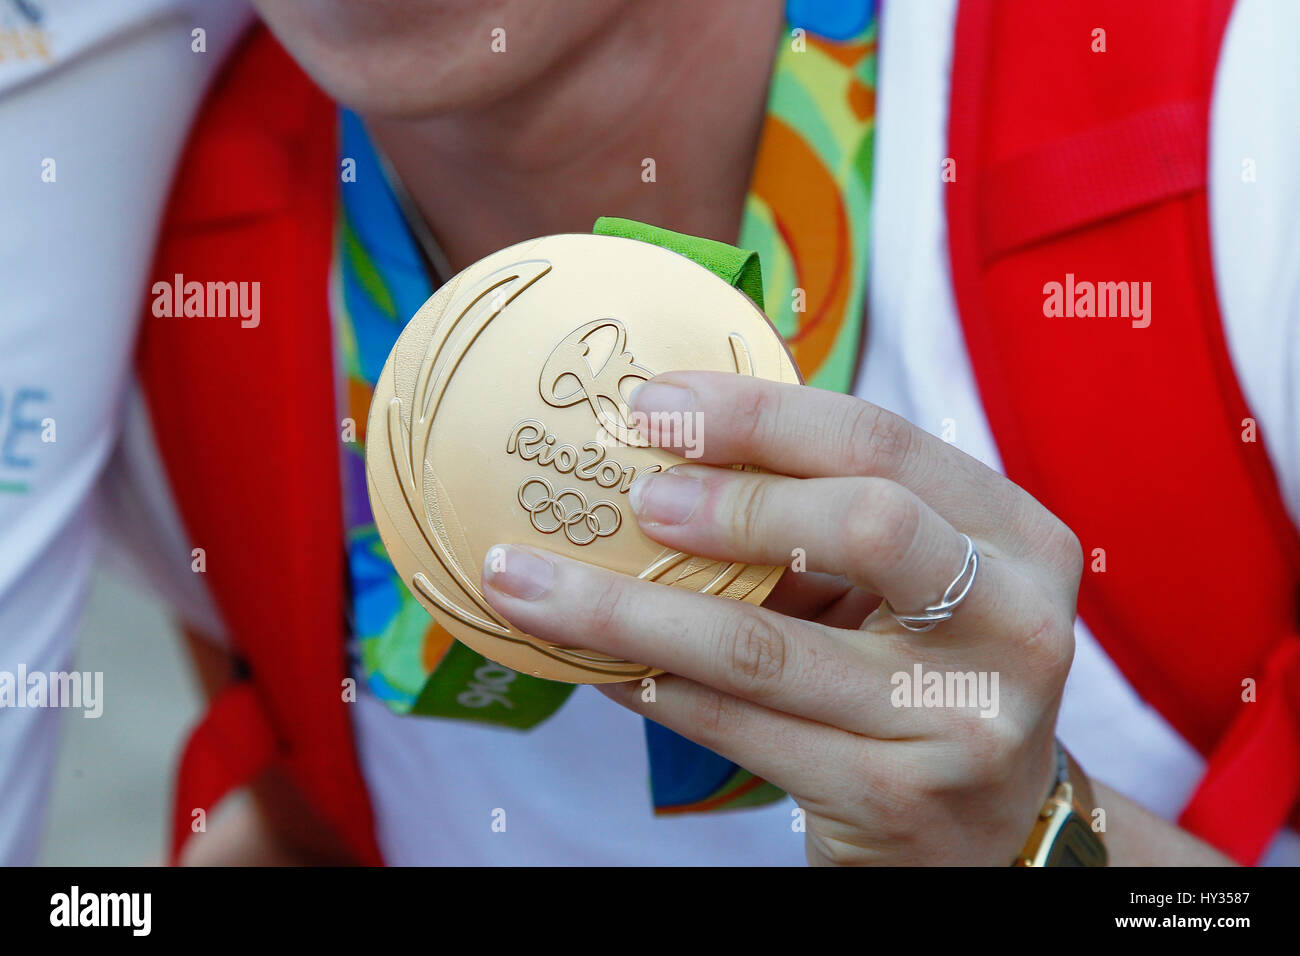 Sport, Olympics, Athlete holding gold medal from Rio games 2016. Stock Photo